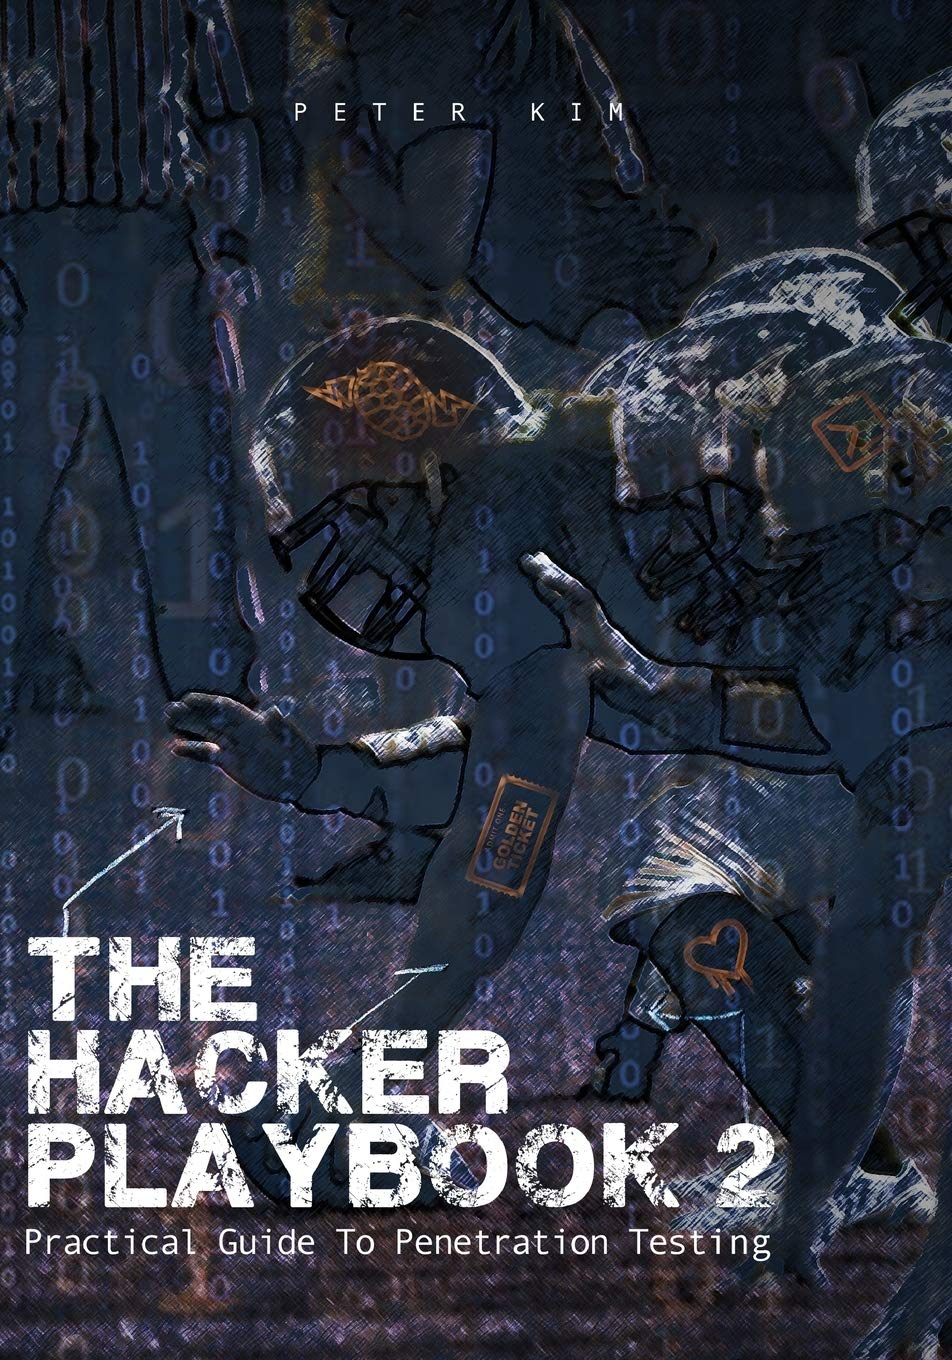 The Hacker Playbook 2 by Peter Kim